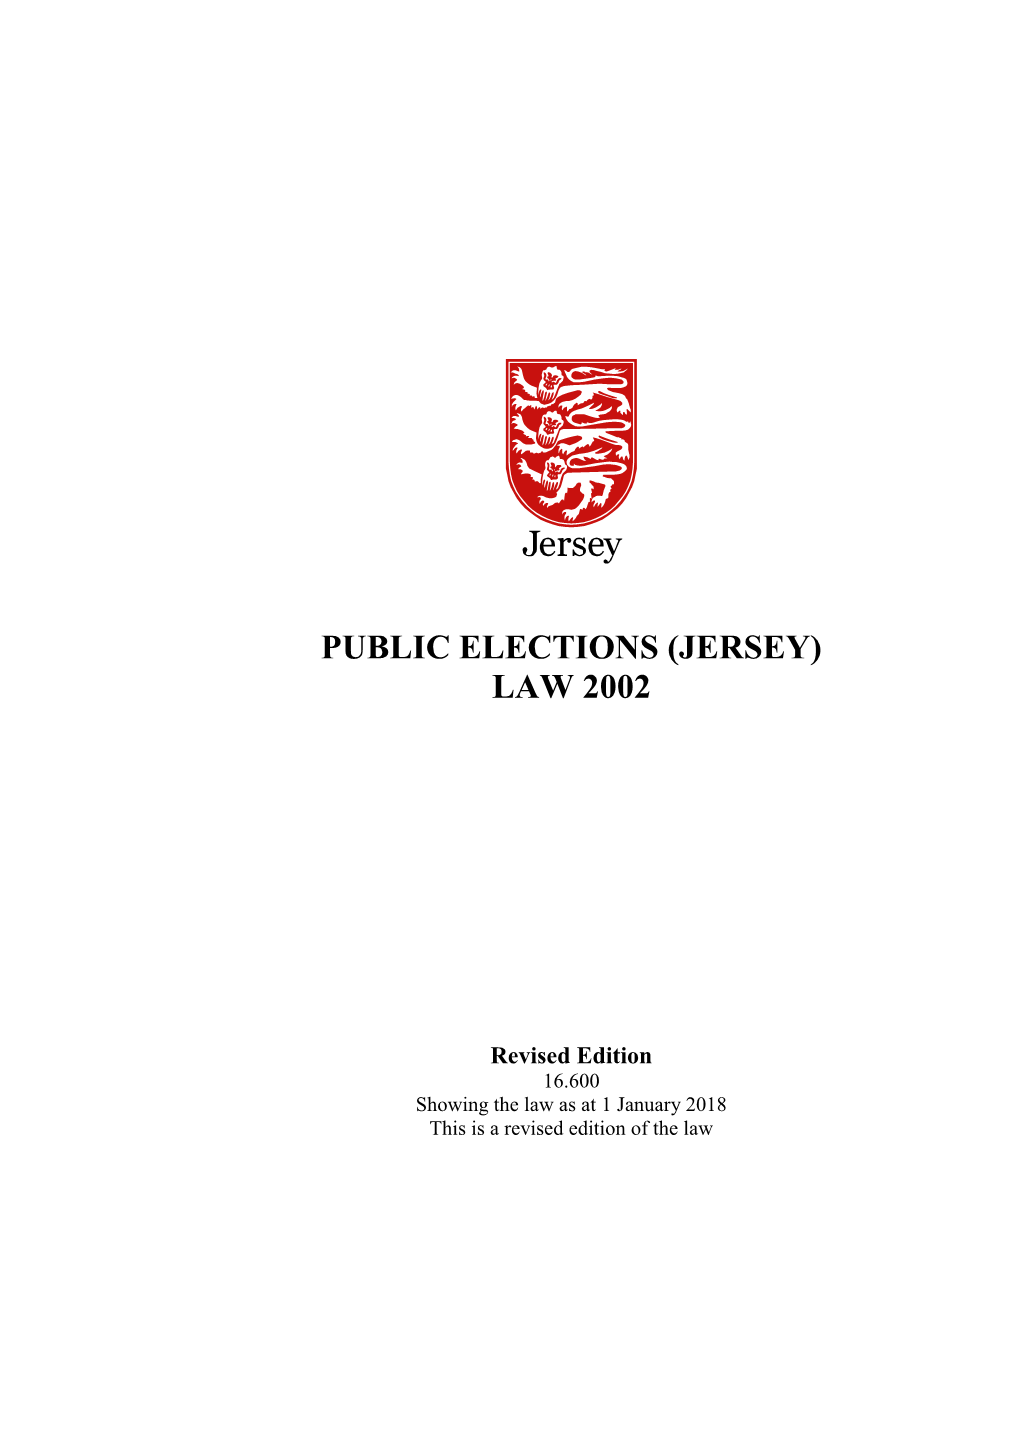 Public Elections (Jersey) Law 2002